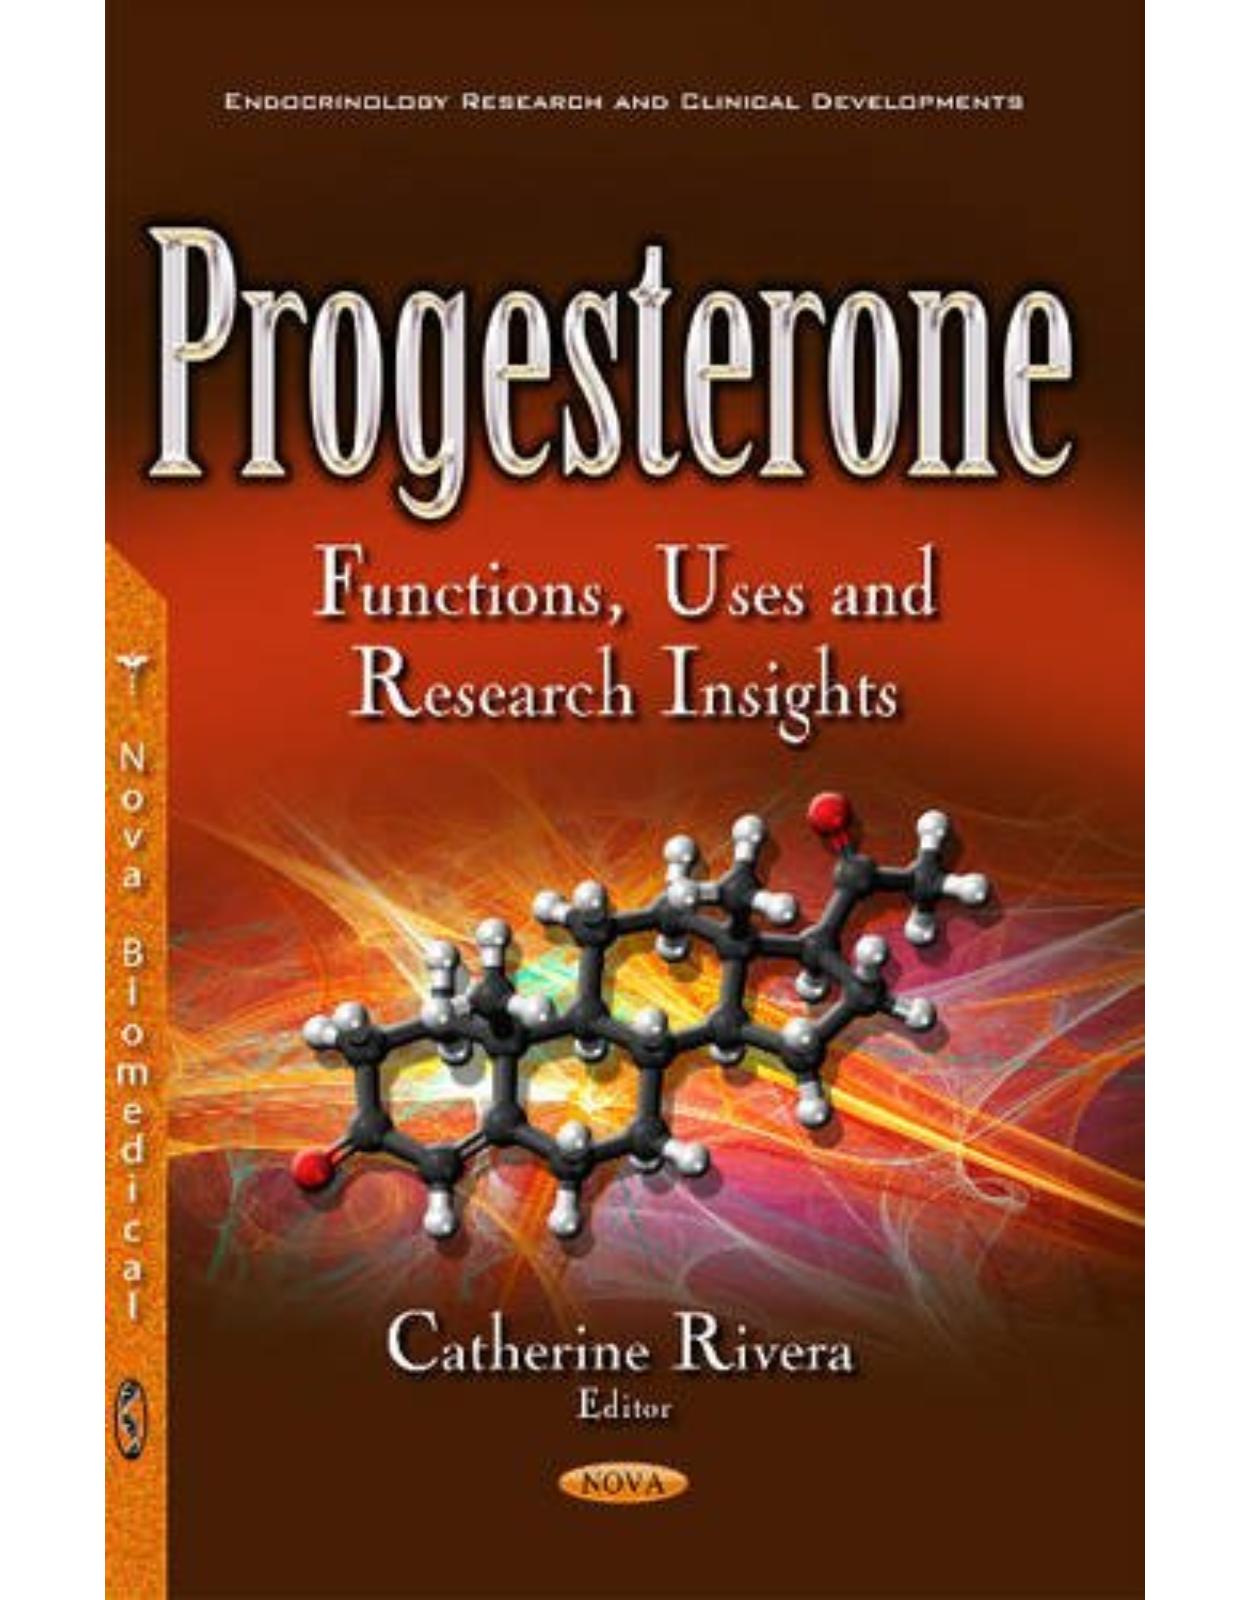 Progesterone: Functions, Uses & Research Insights